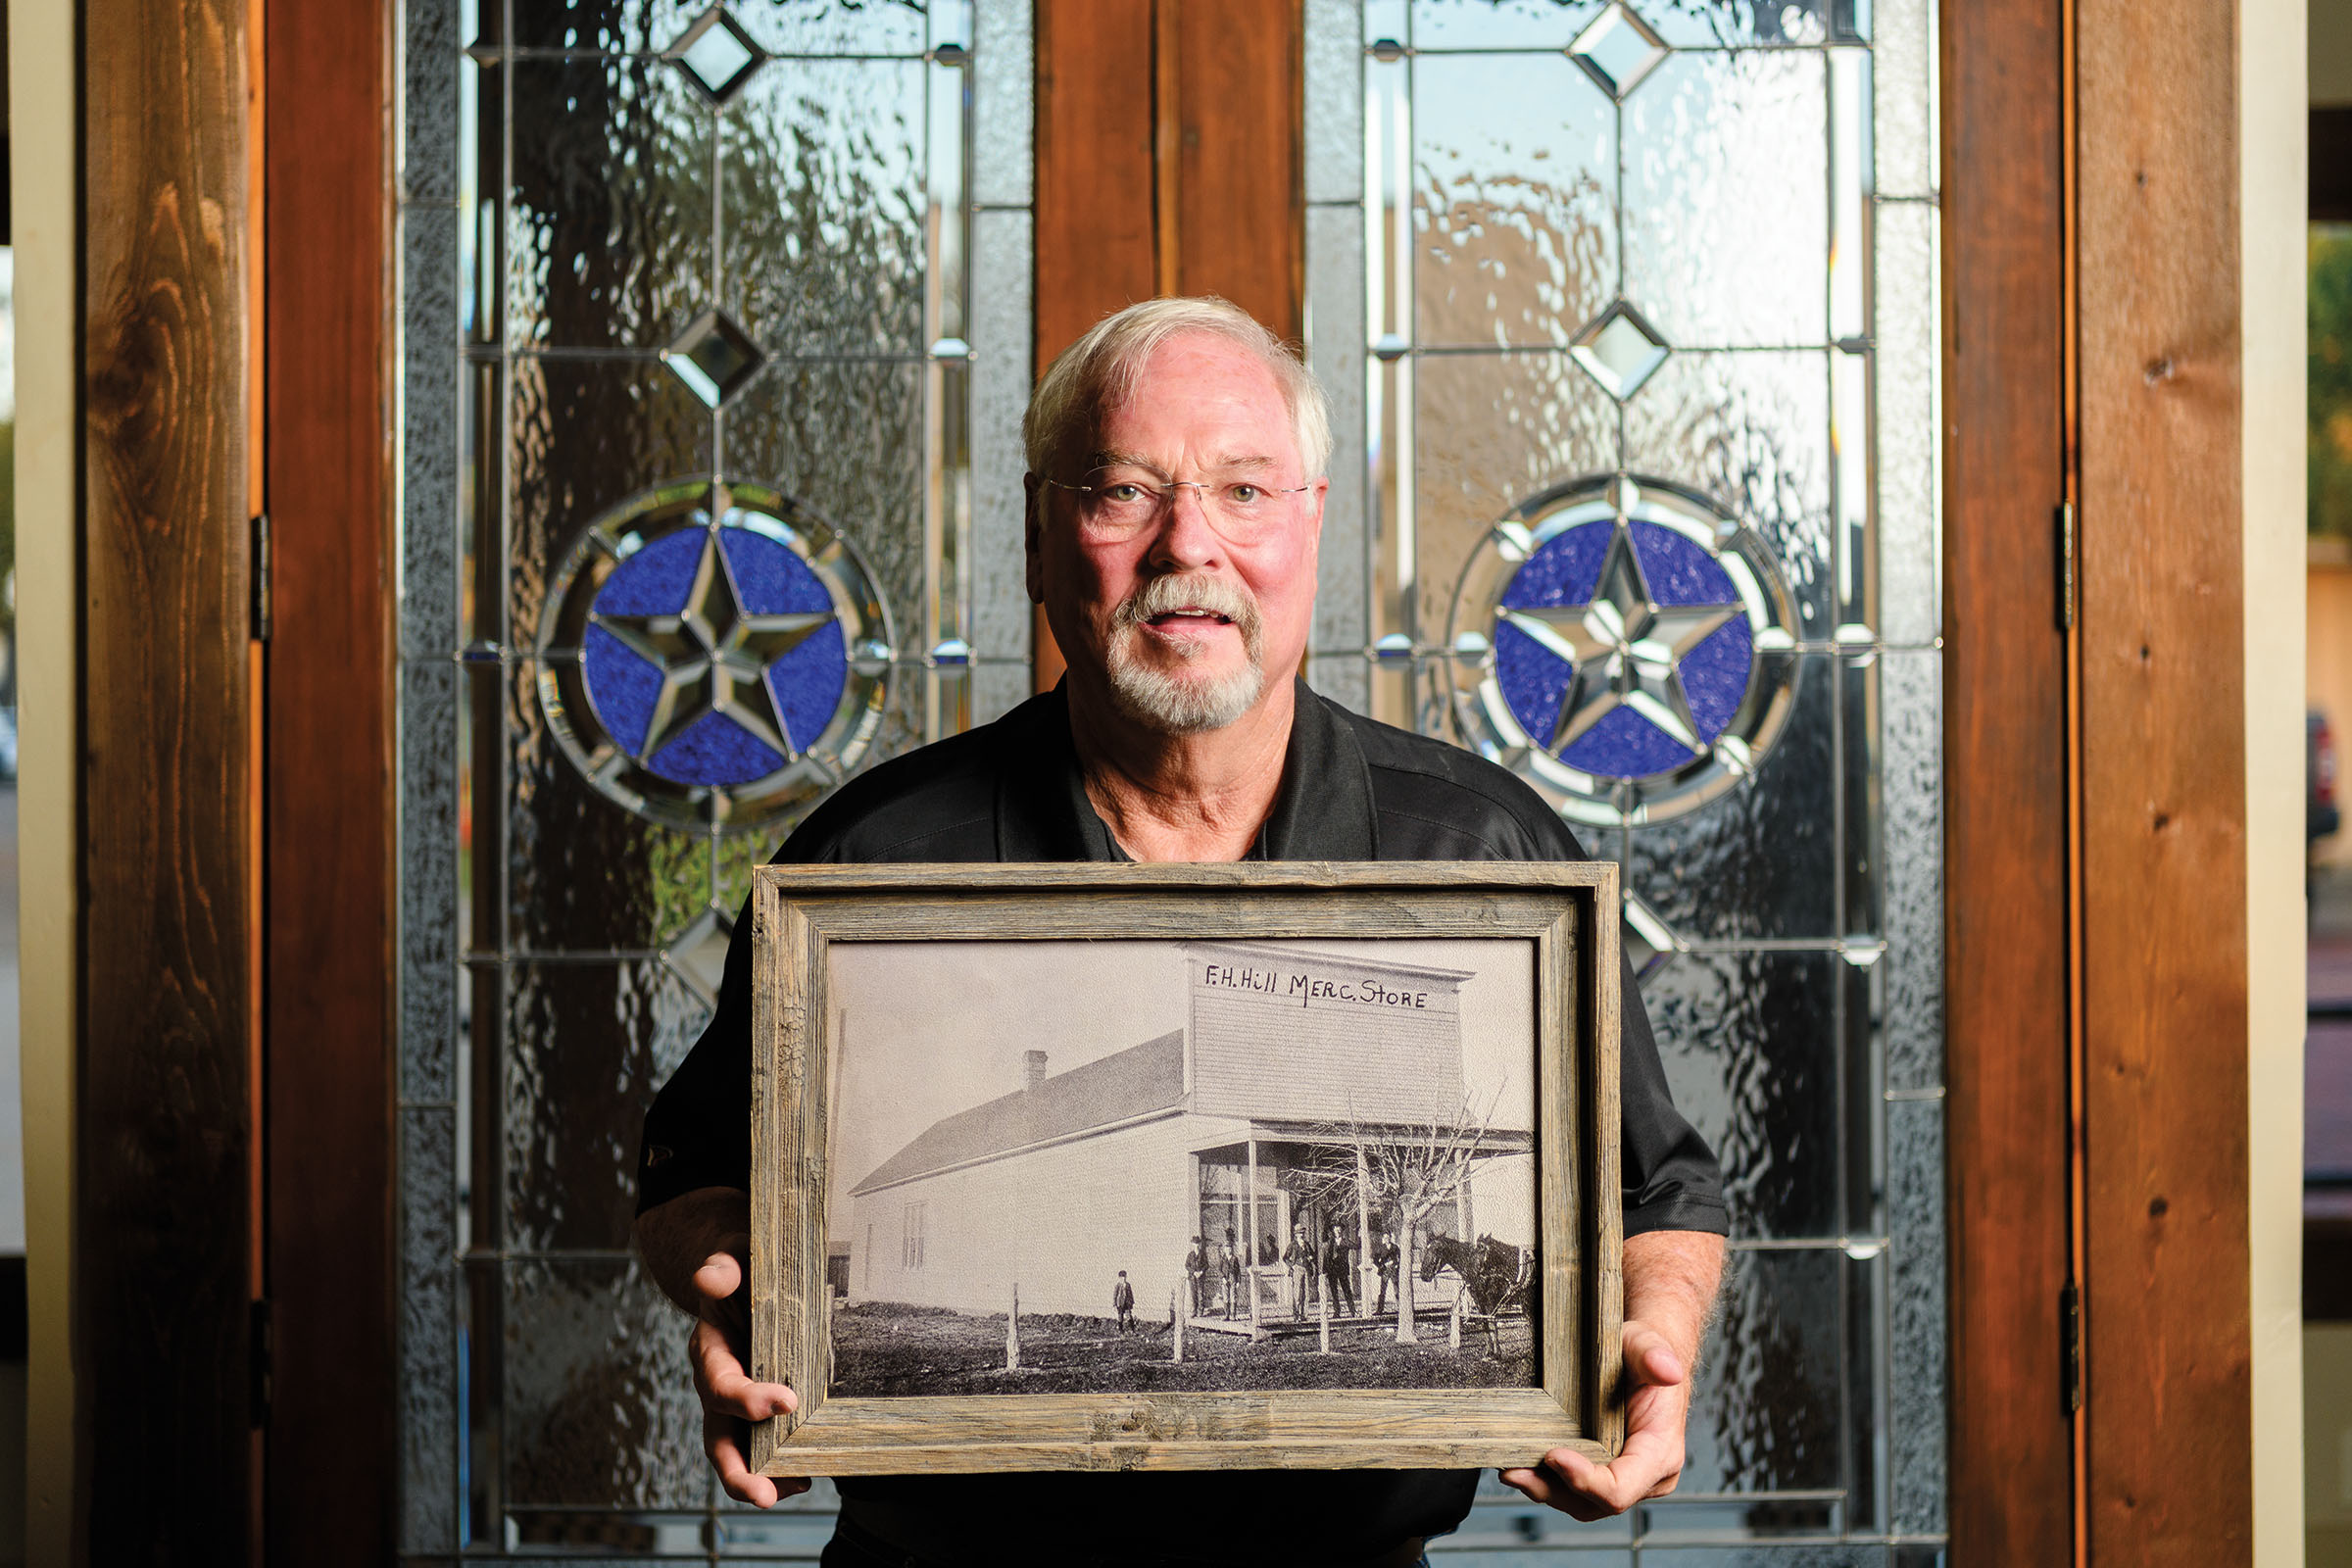 A man holds a vintage photograph in front of a stained-glass window